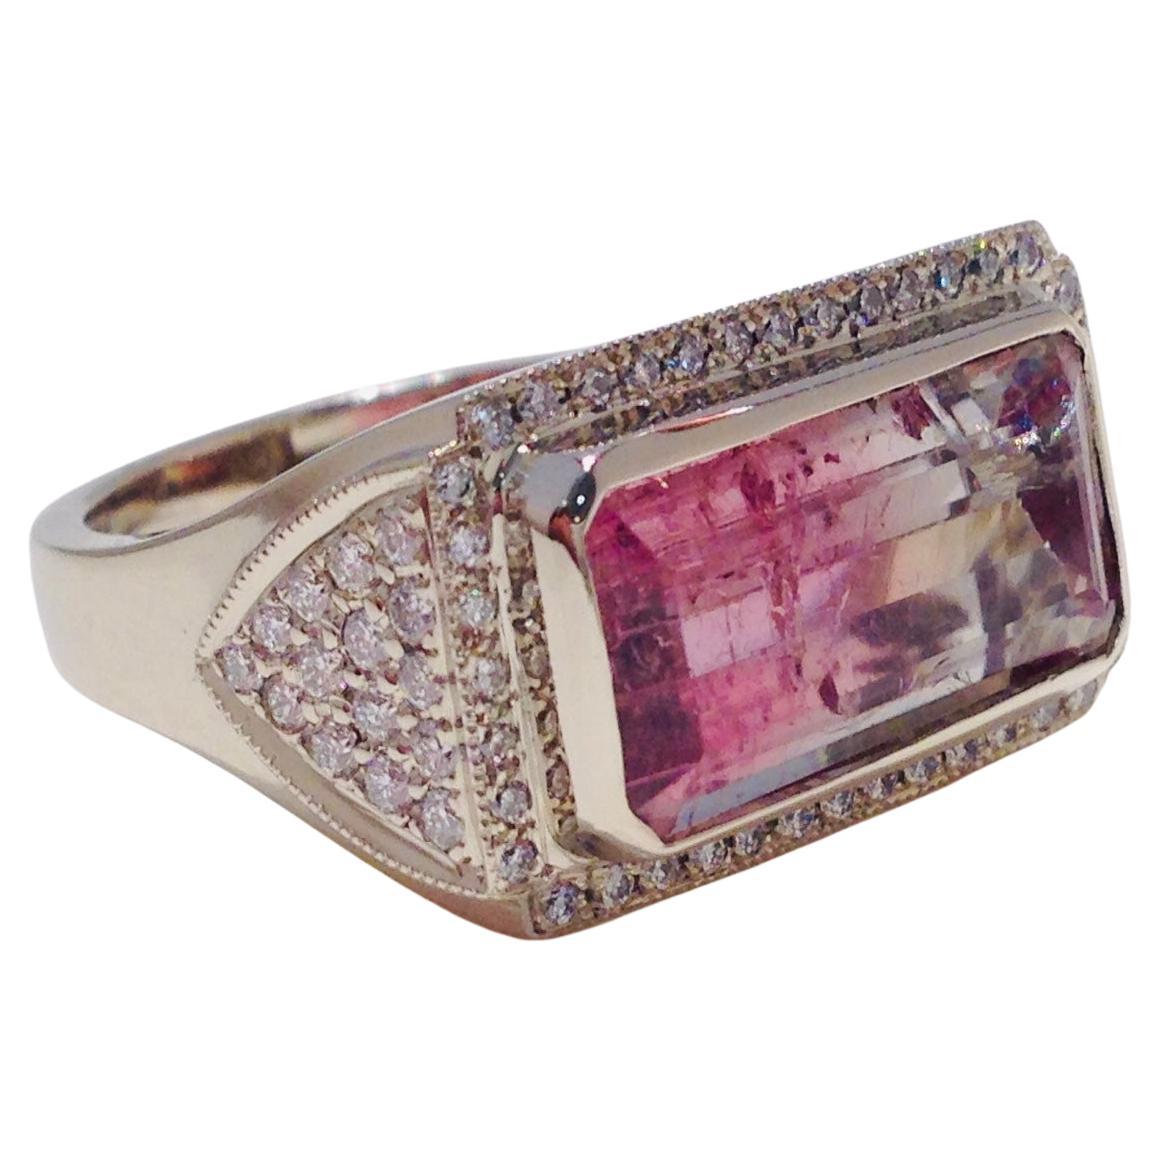 One-of-a-Kind Bi-Color Tourmaline and Pave Diamond Ring custom made by Marcy Feldman for HEARTWEAR DESIGNS. 14K White Gold ring, weighing 6.3 dwt.  The ring has a bezel set Emerald Cut Bi-Color Tourmaline. The colors are blue and pink. It measures